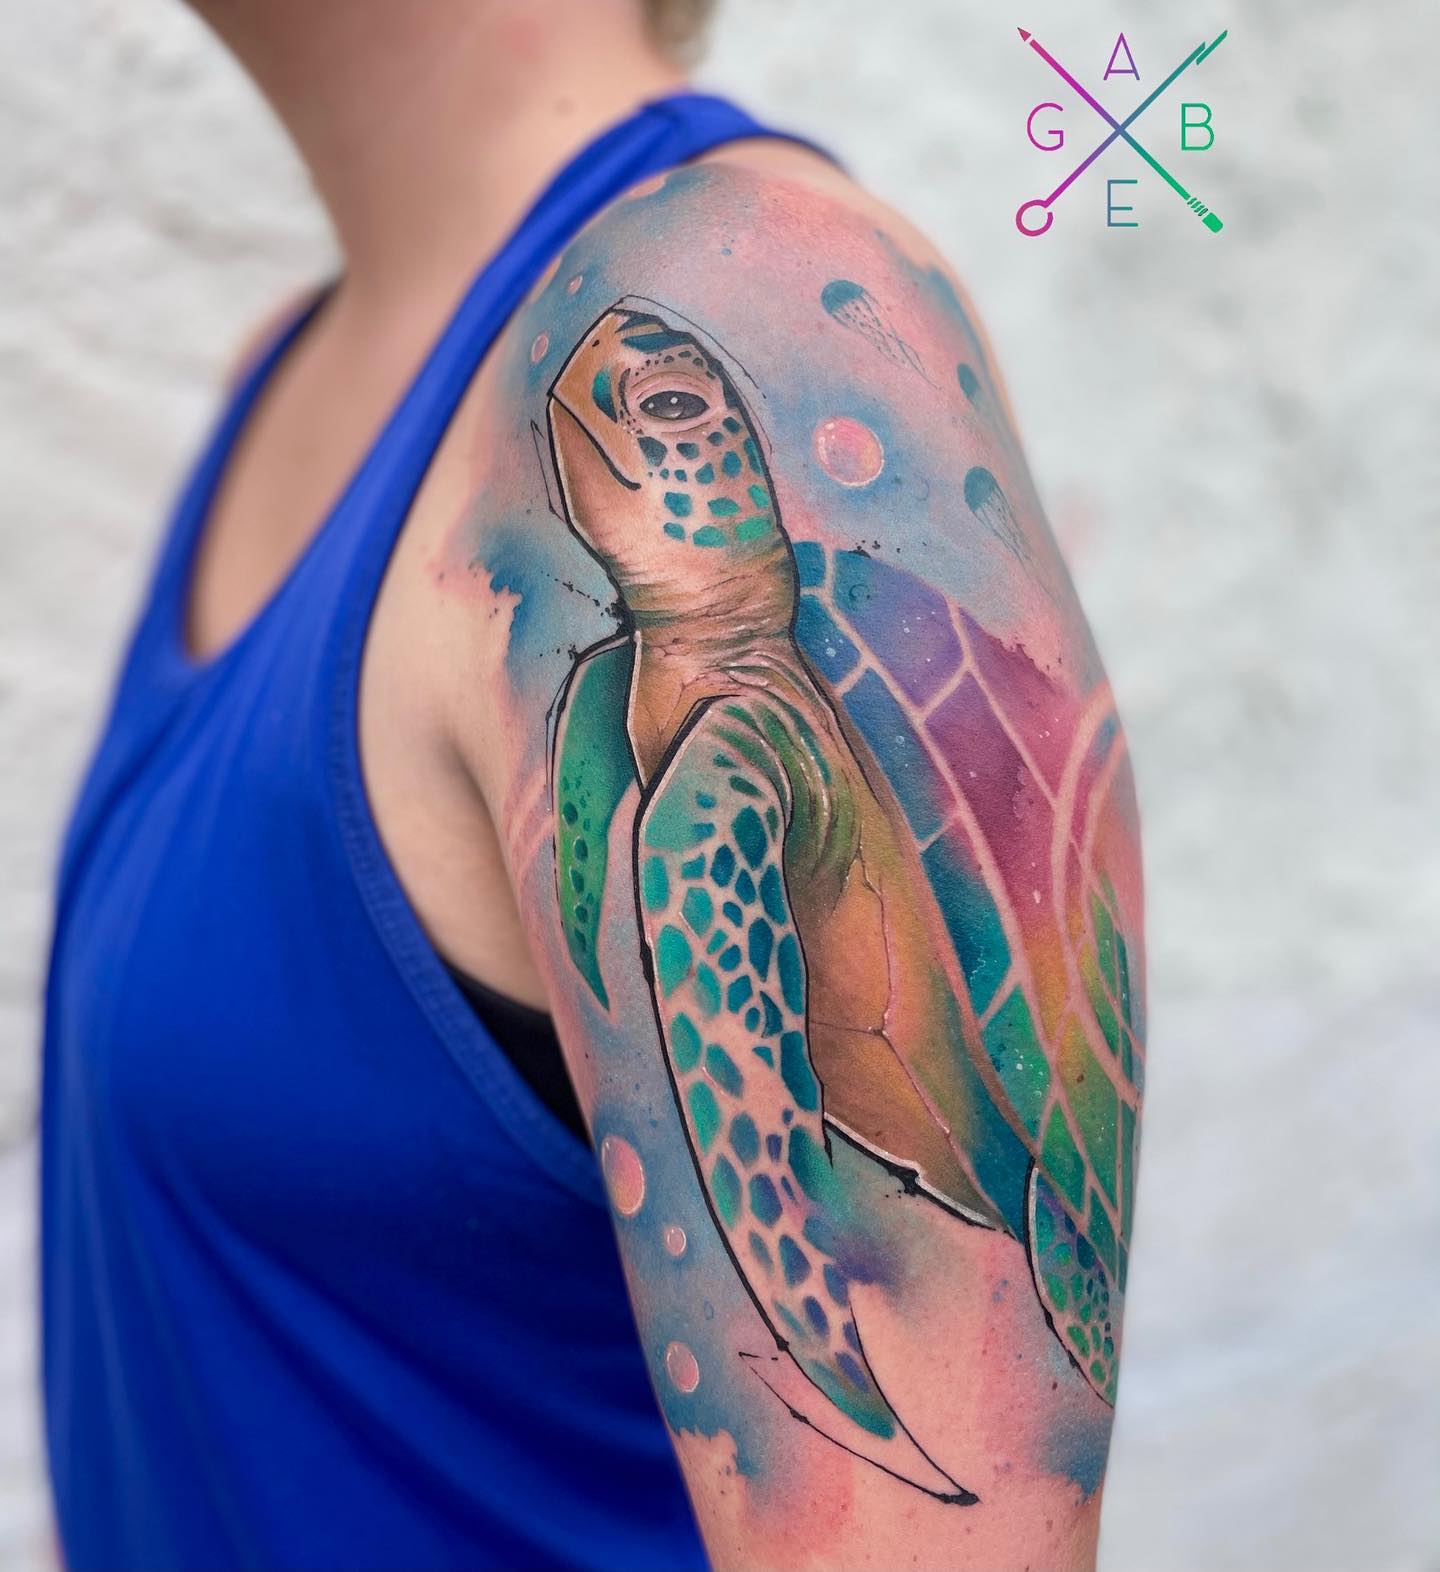 A big size sea turtle tattoo is ready to make your arm stand out more than ever! It's so soft and dreamy. Blue background looks extra soft and soothing at the same time. Go for it without any hesitation.